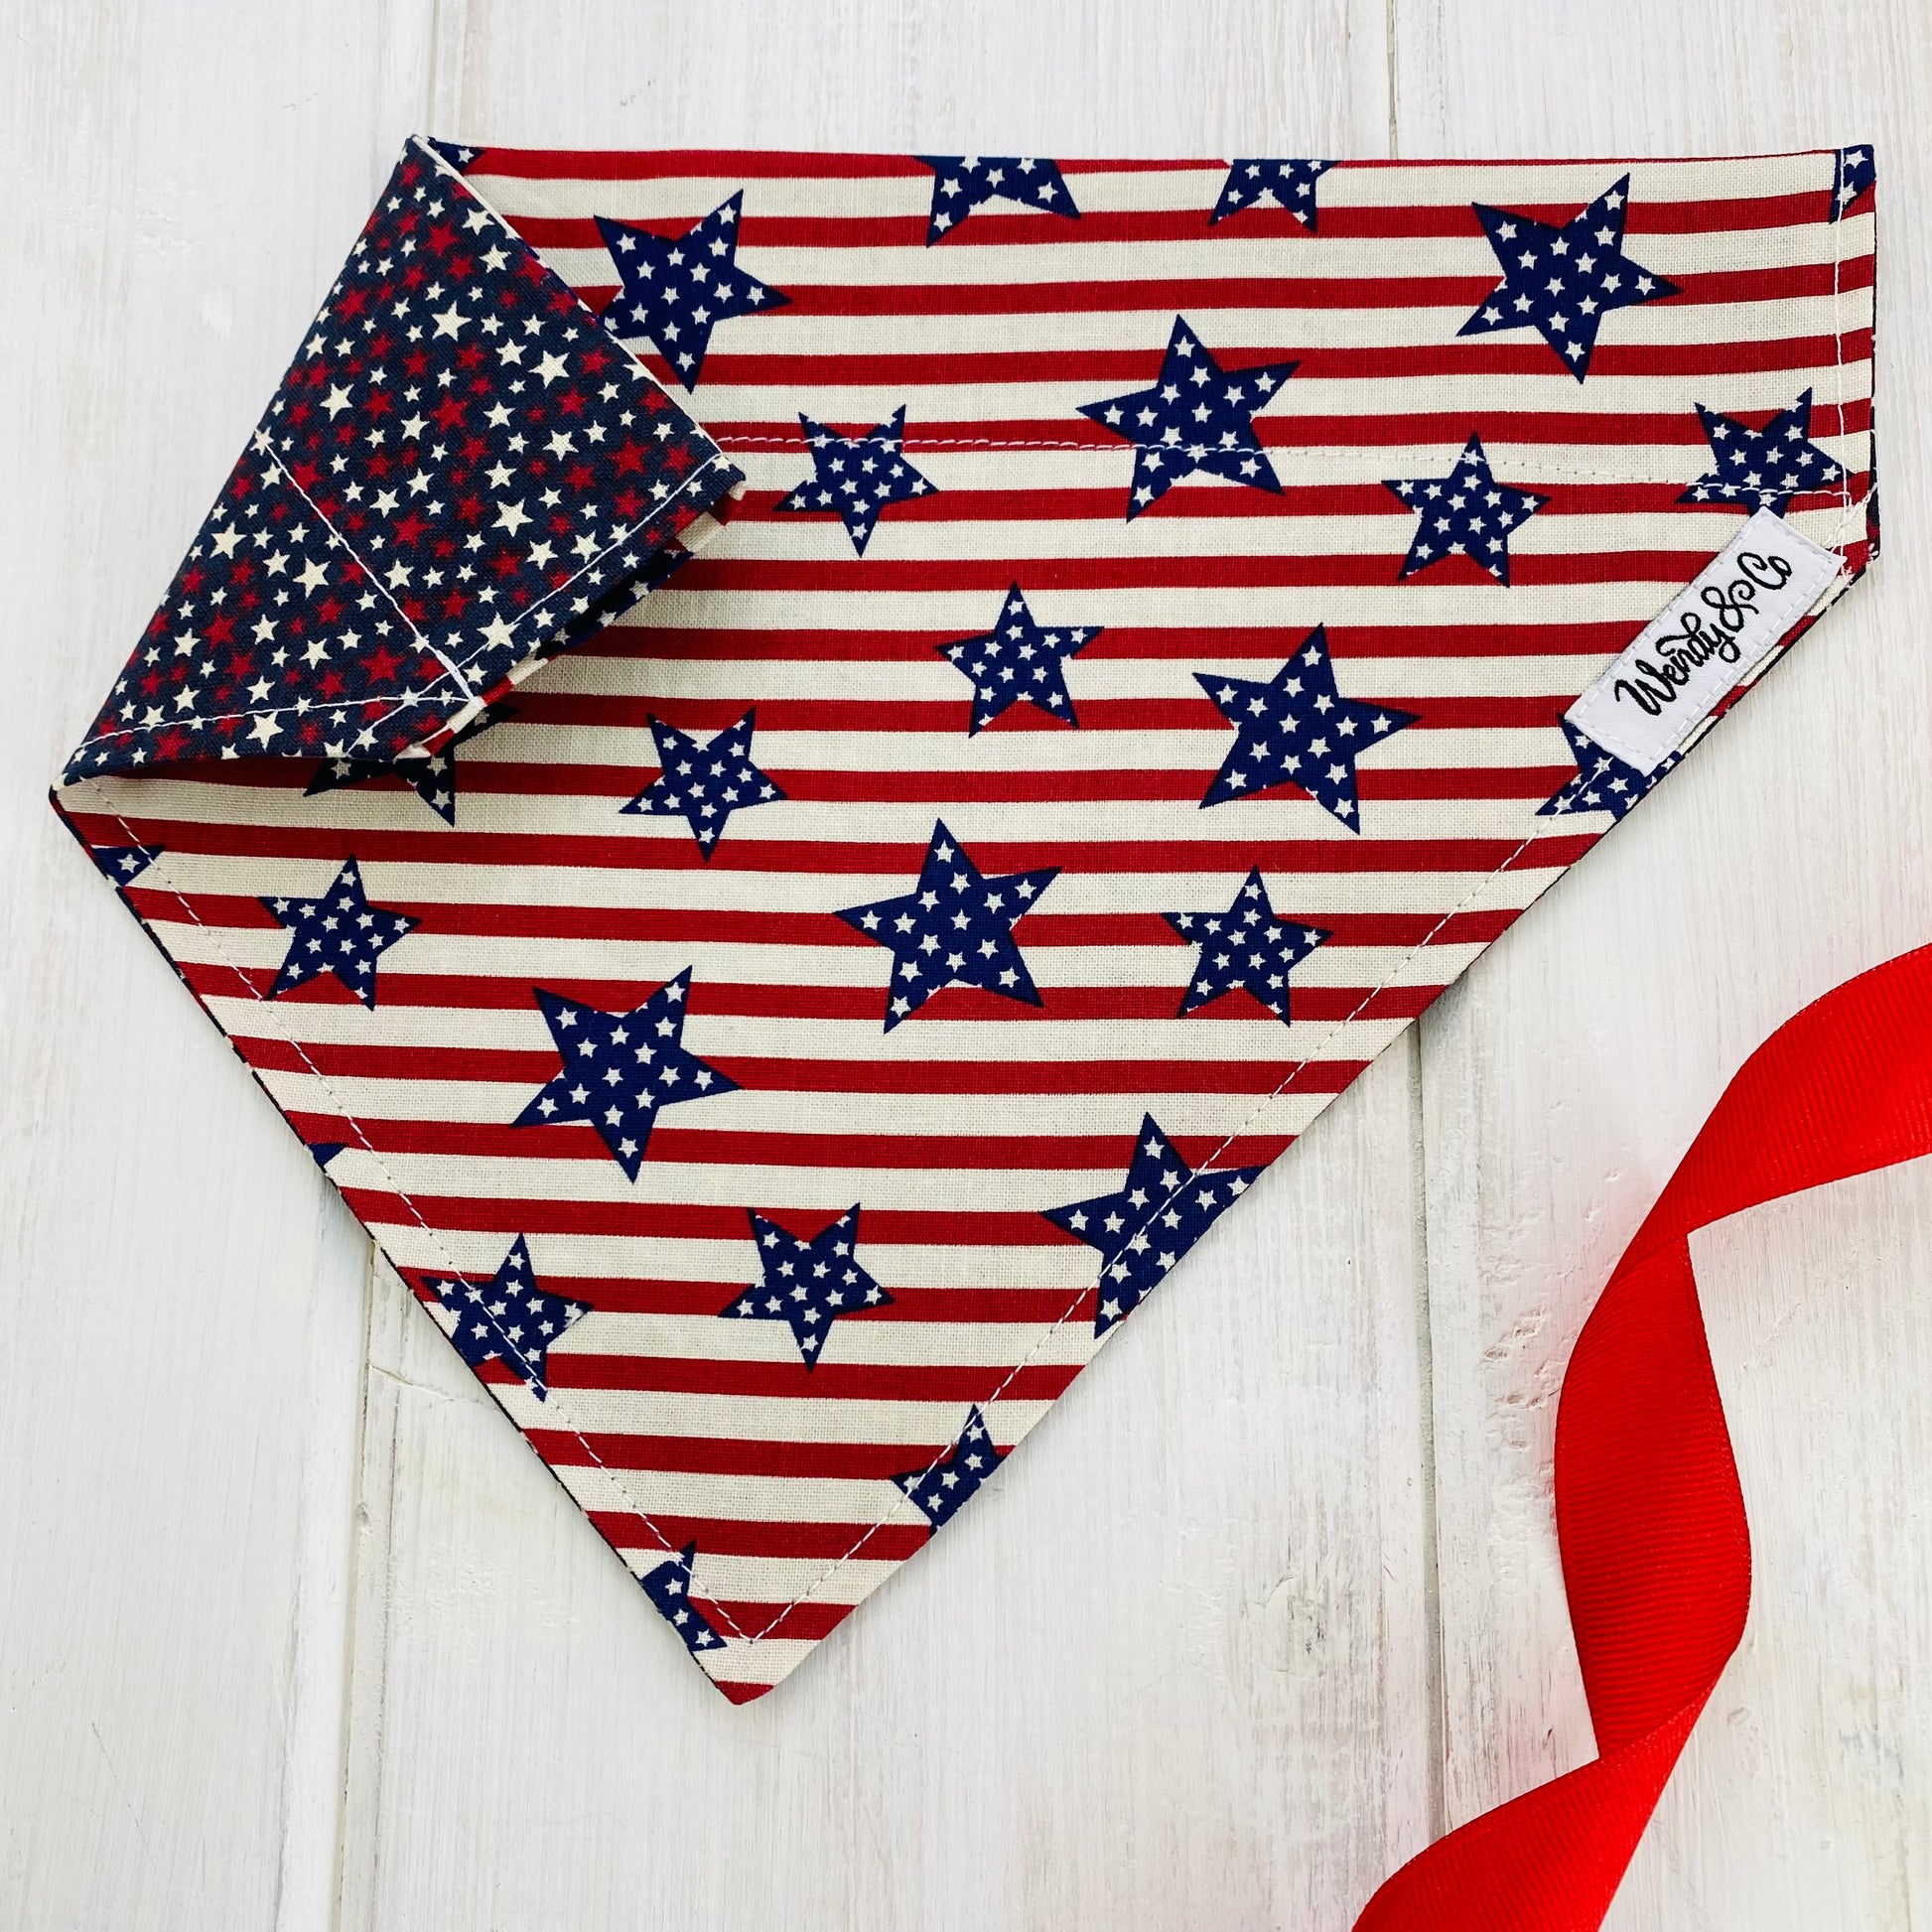 Represent USA with our patriotic dog bandana- red, white and navy blue stars on one side, and patriotic red stripes with navy stars on the other side.